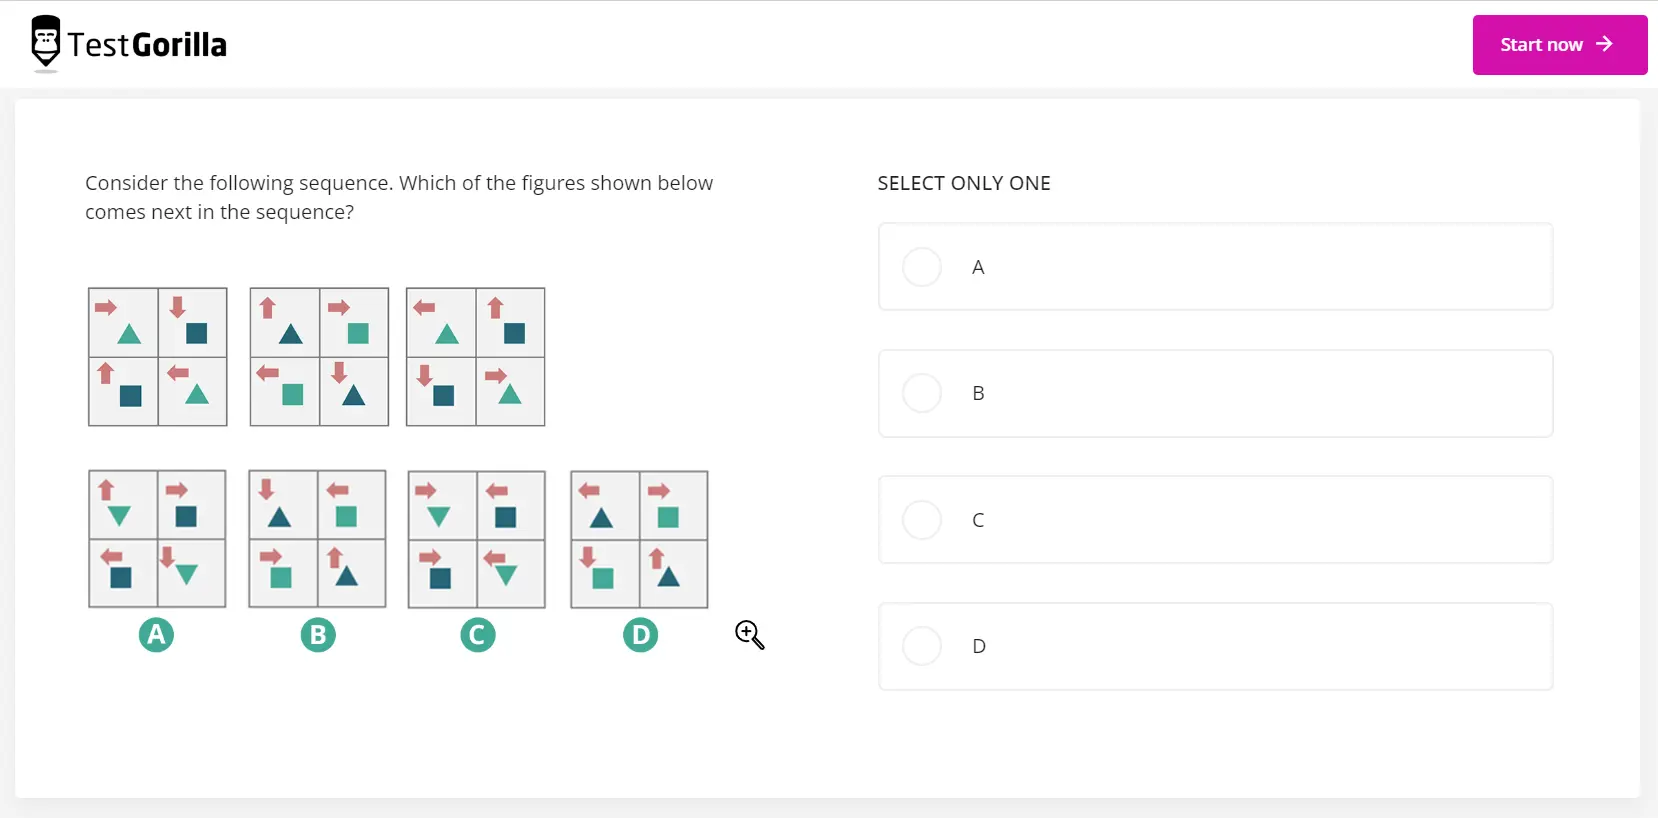 An example question from TestGorilla's Spatial Reasoning test